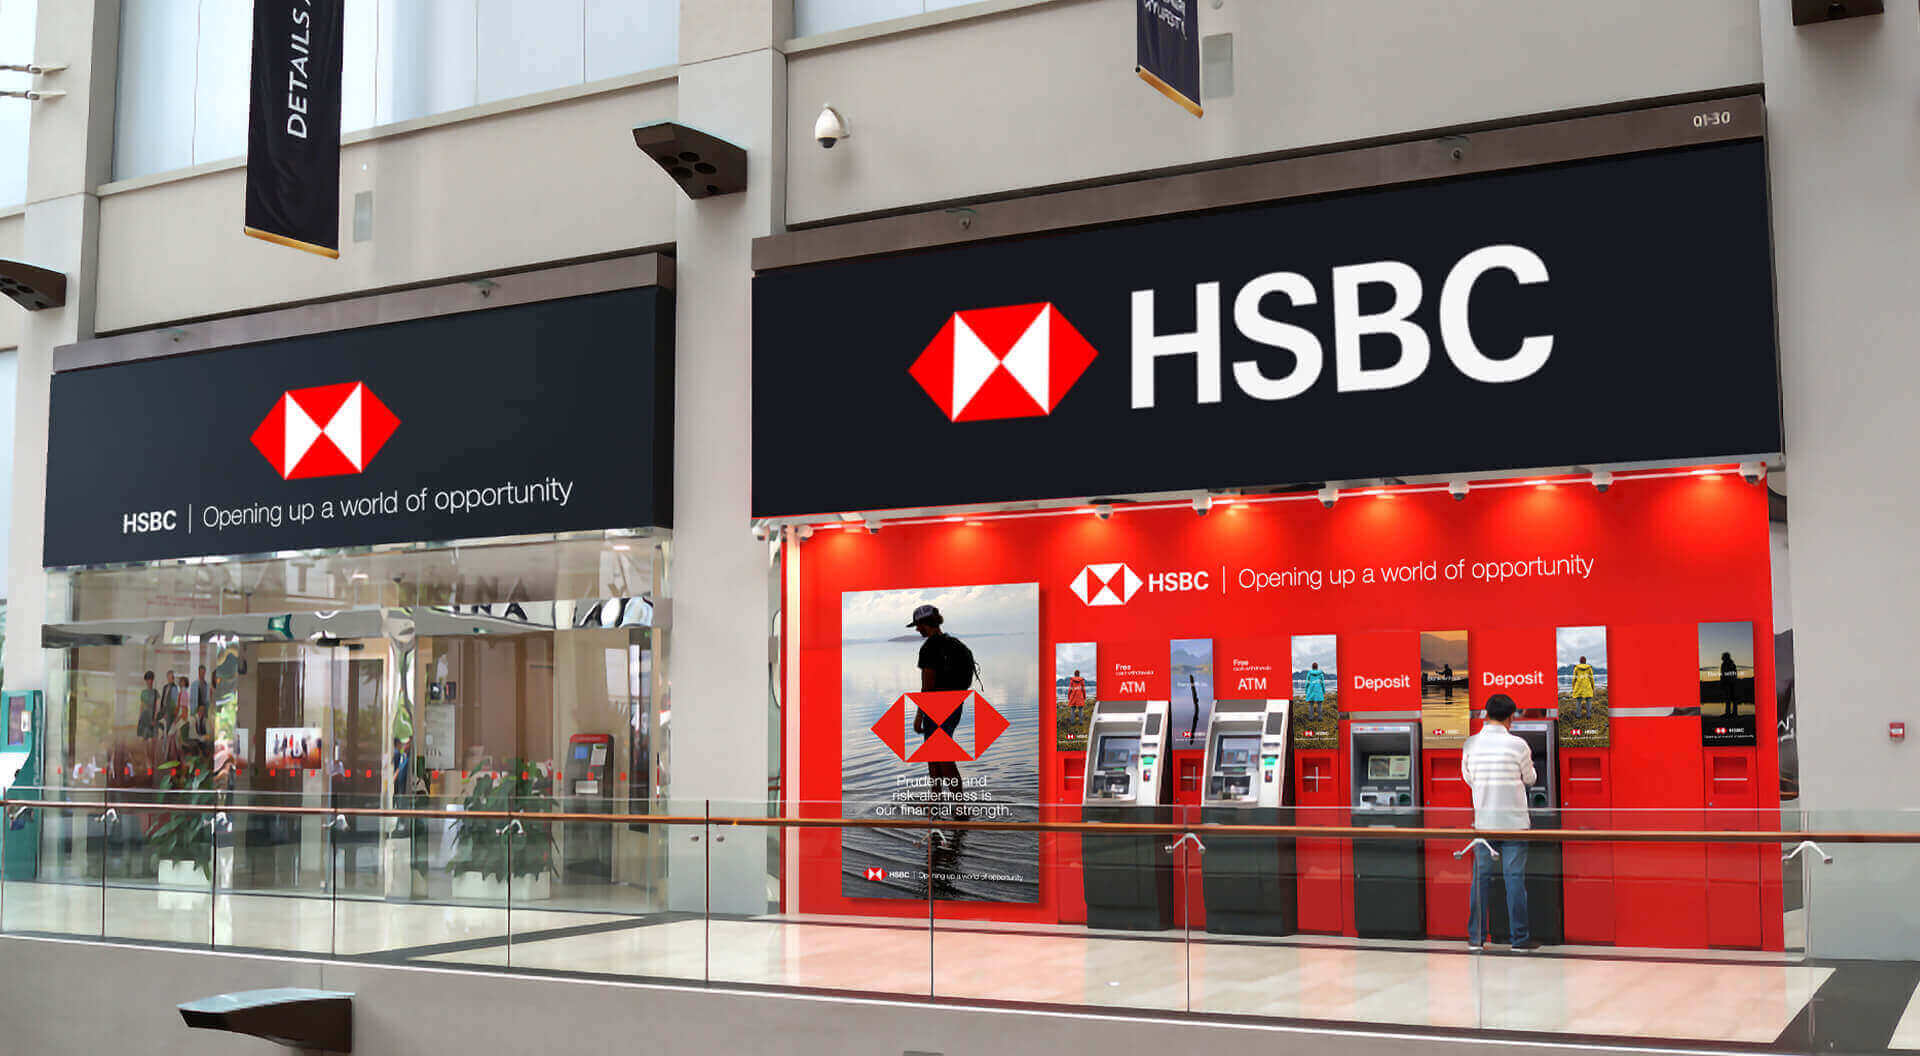 HSBC Bank New branch design concept. Entrance and self-service ATM’s. Advertising, Ambition doesn’t see boundaries - Branding